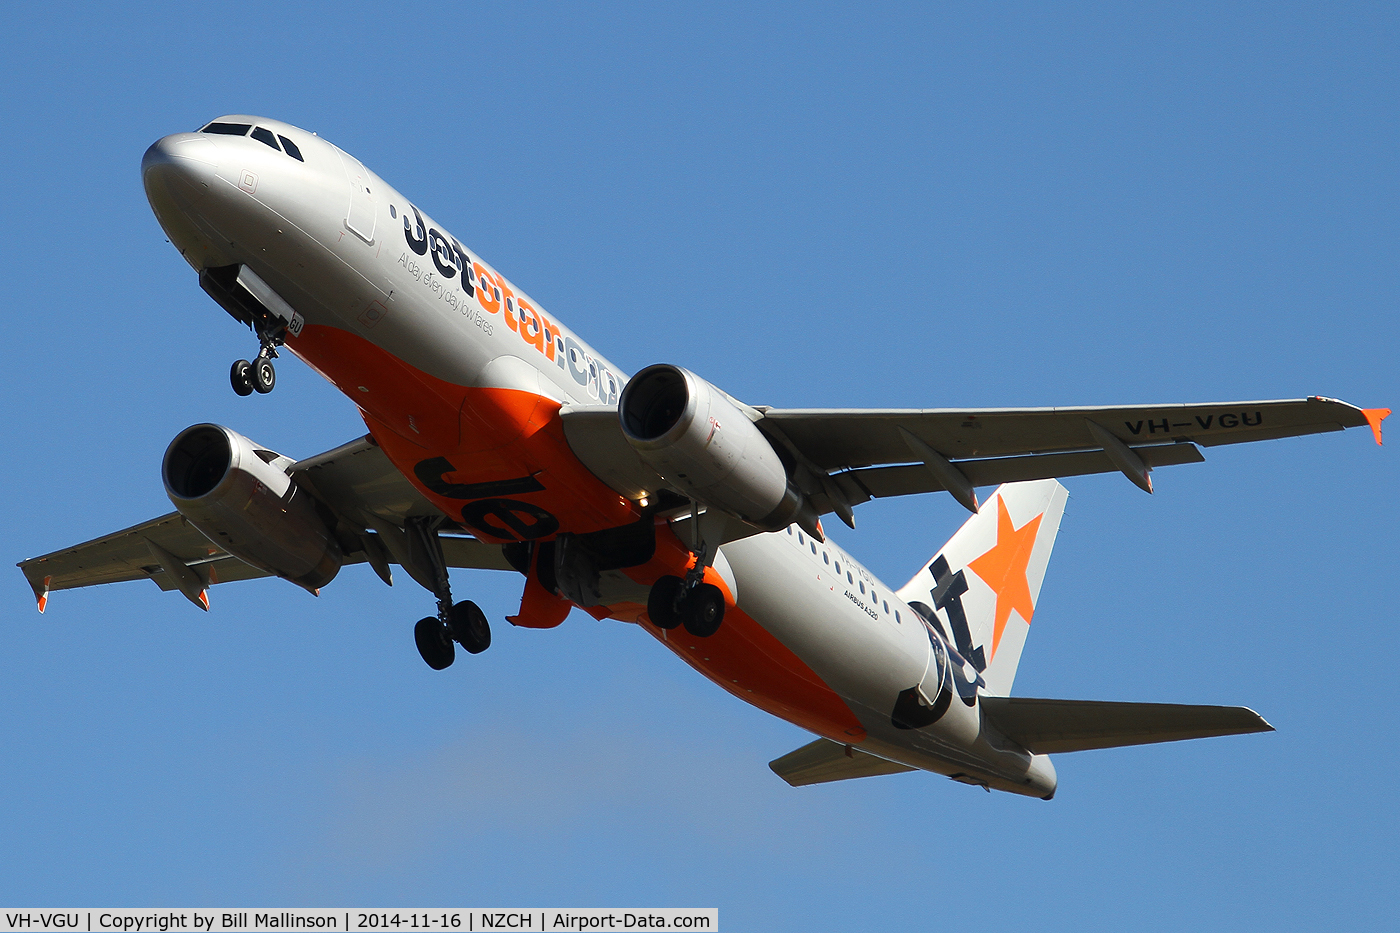 VH-VGU, 2010 Airbus A320-214 C/N 4245, away from 02